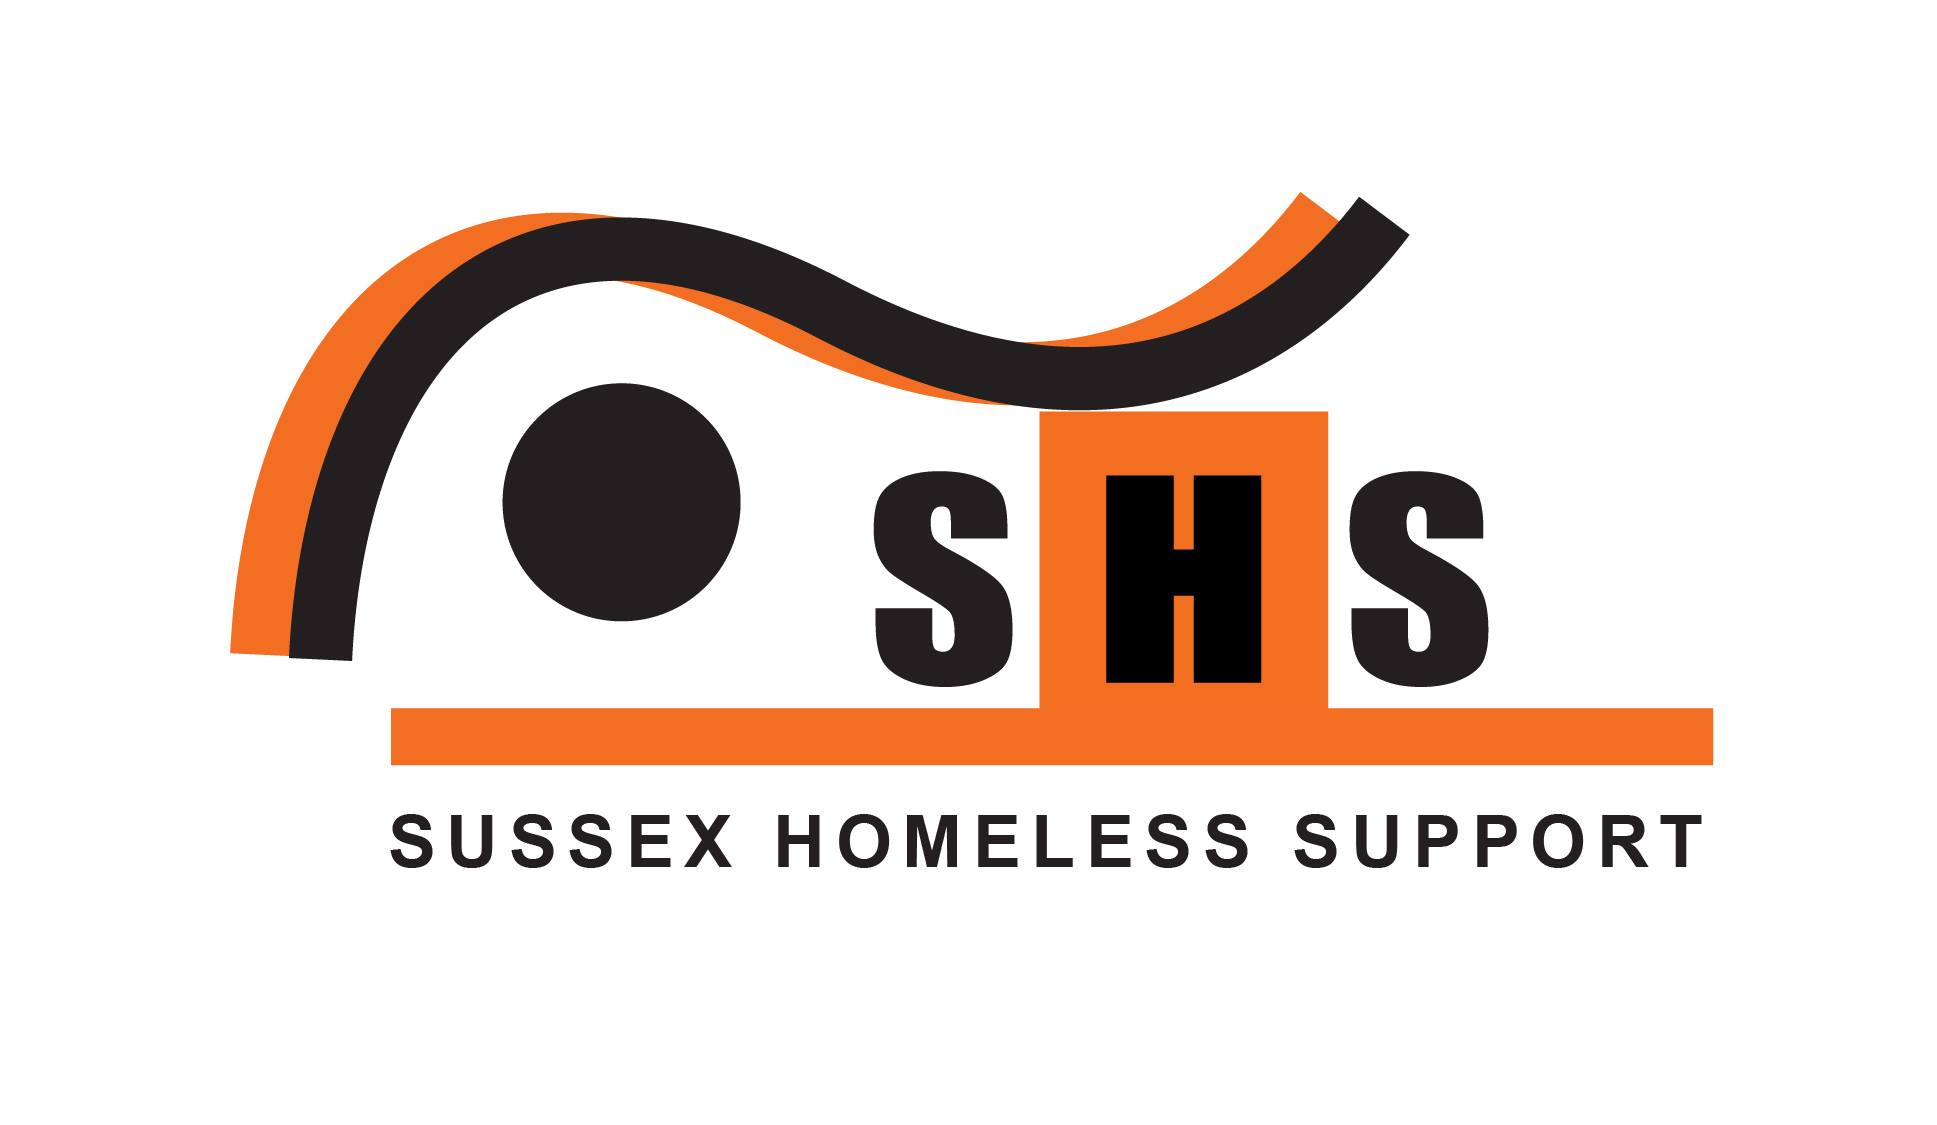 Sussex Homeless Support